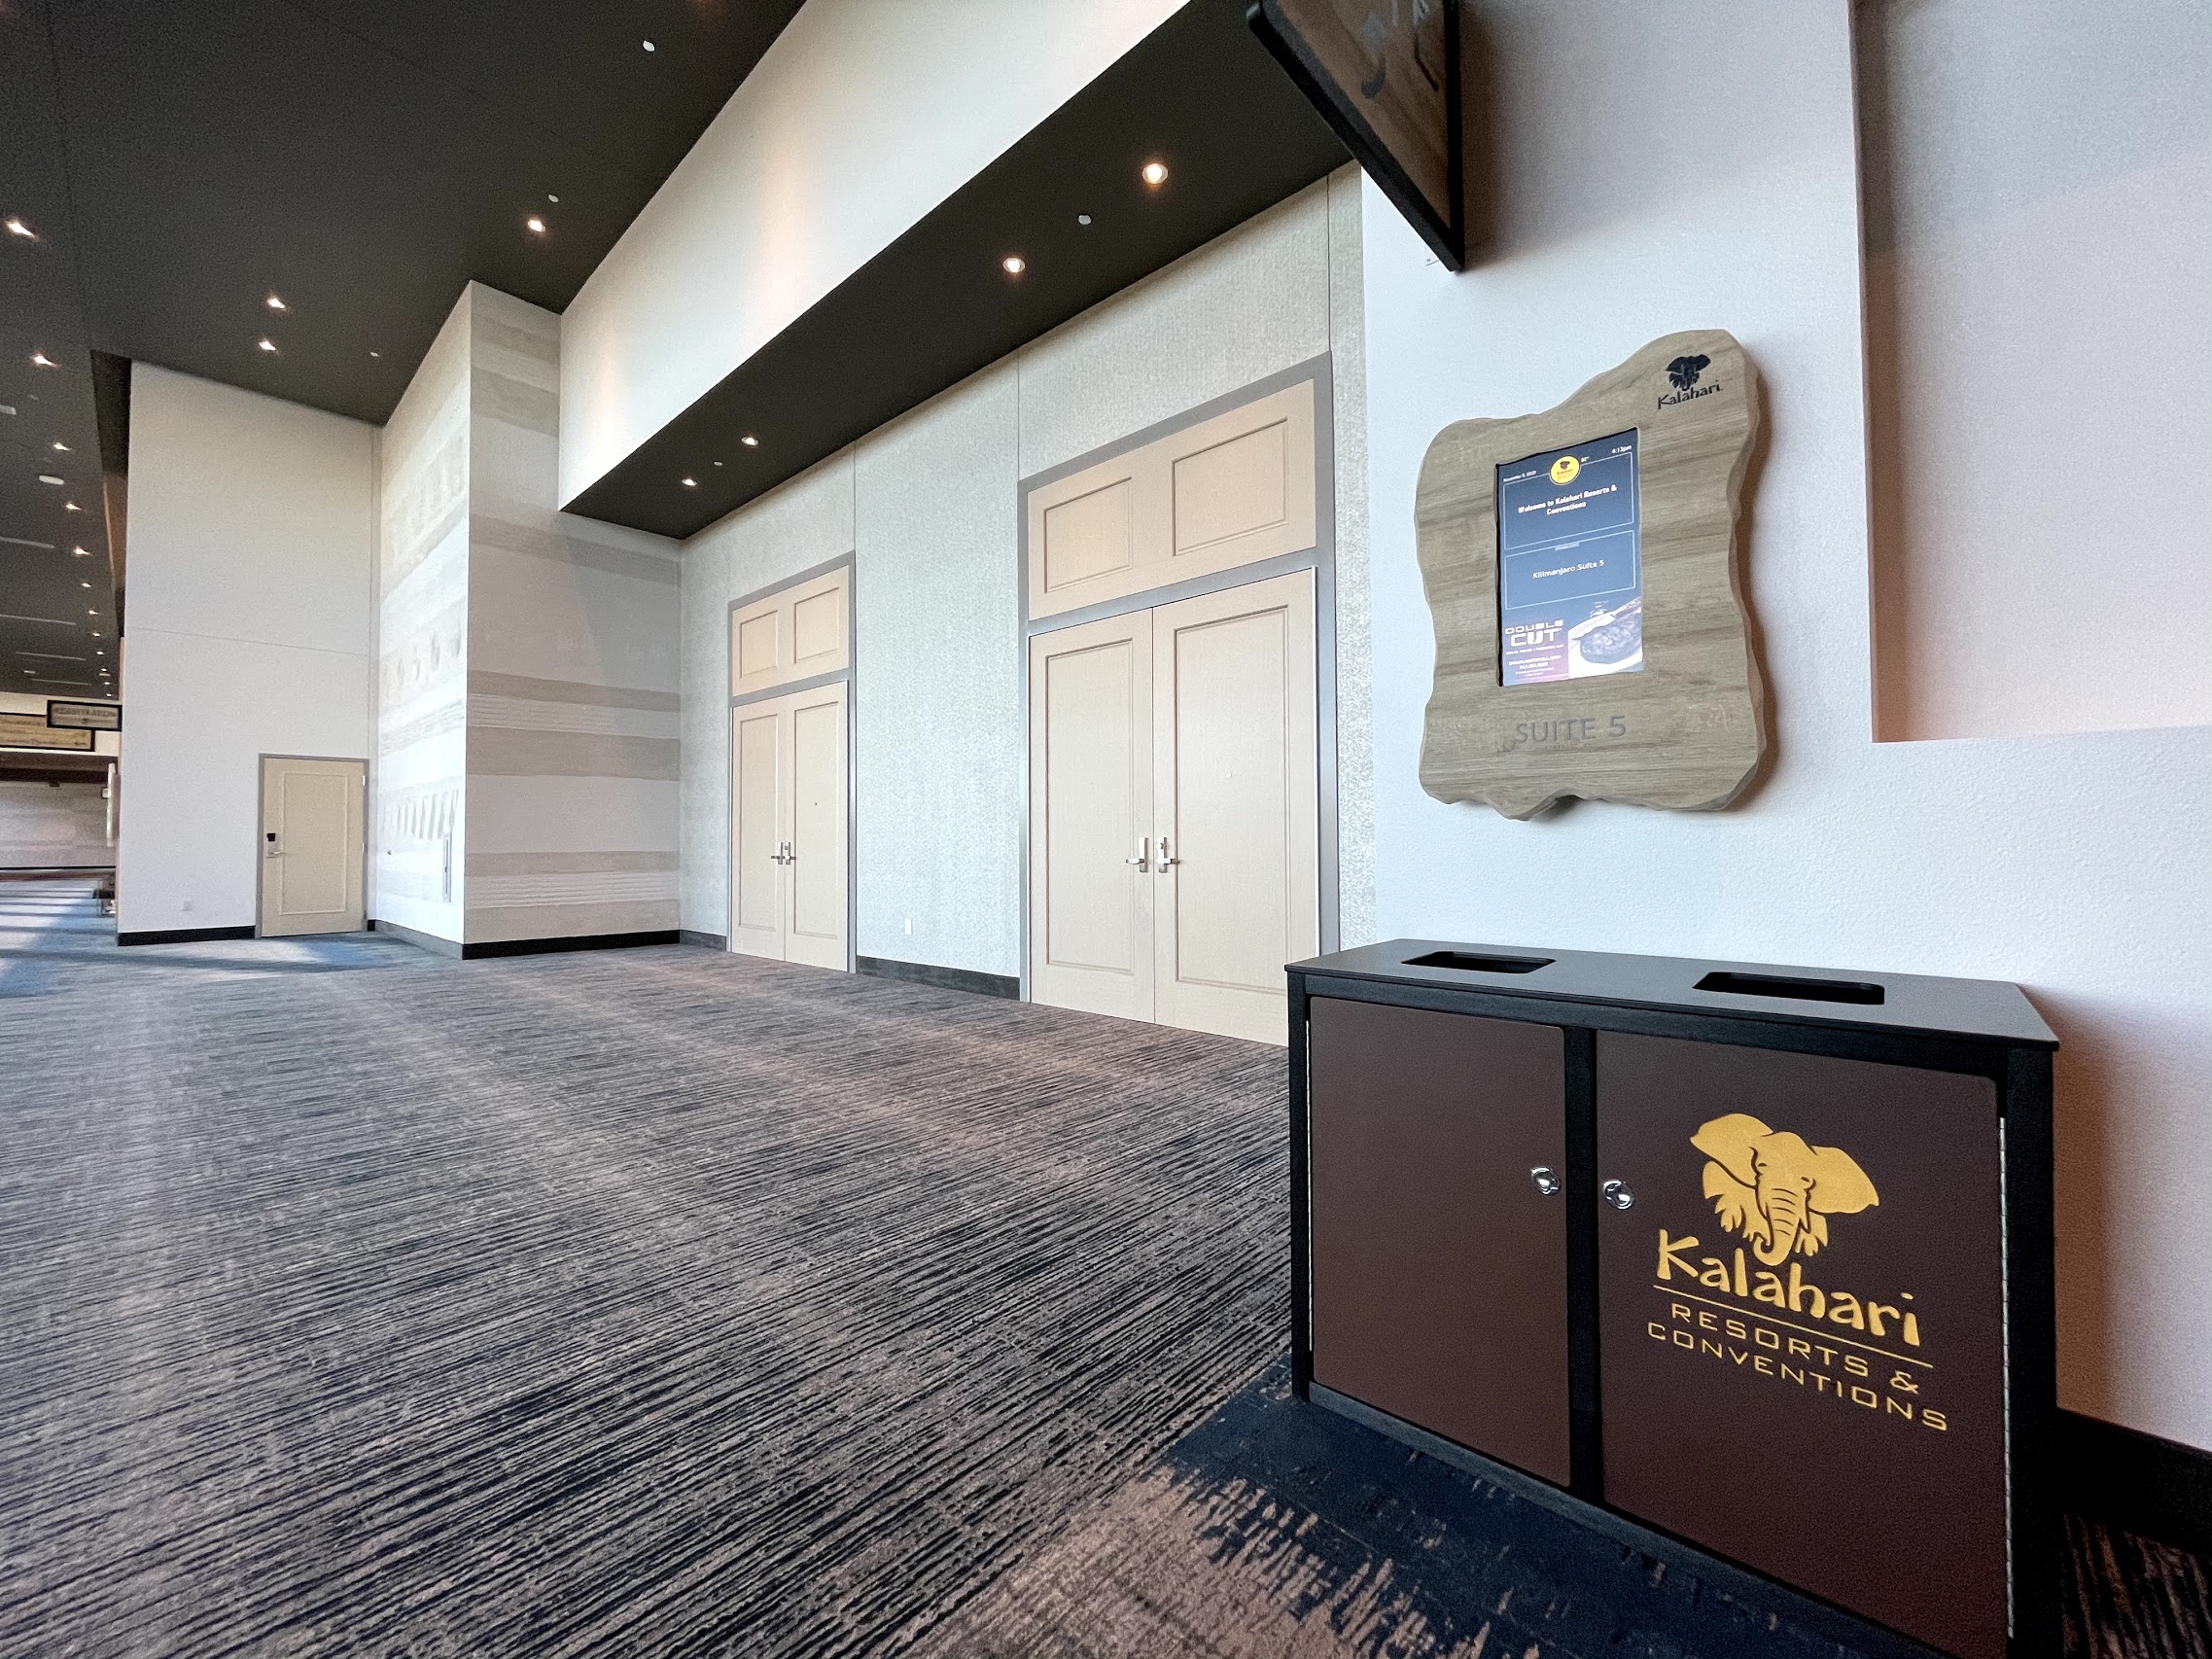 Meeting Room Signage by Ping HD outside of meeting rooms at Kalahari resort and convention center in Austin, Texas.